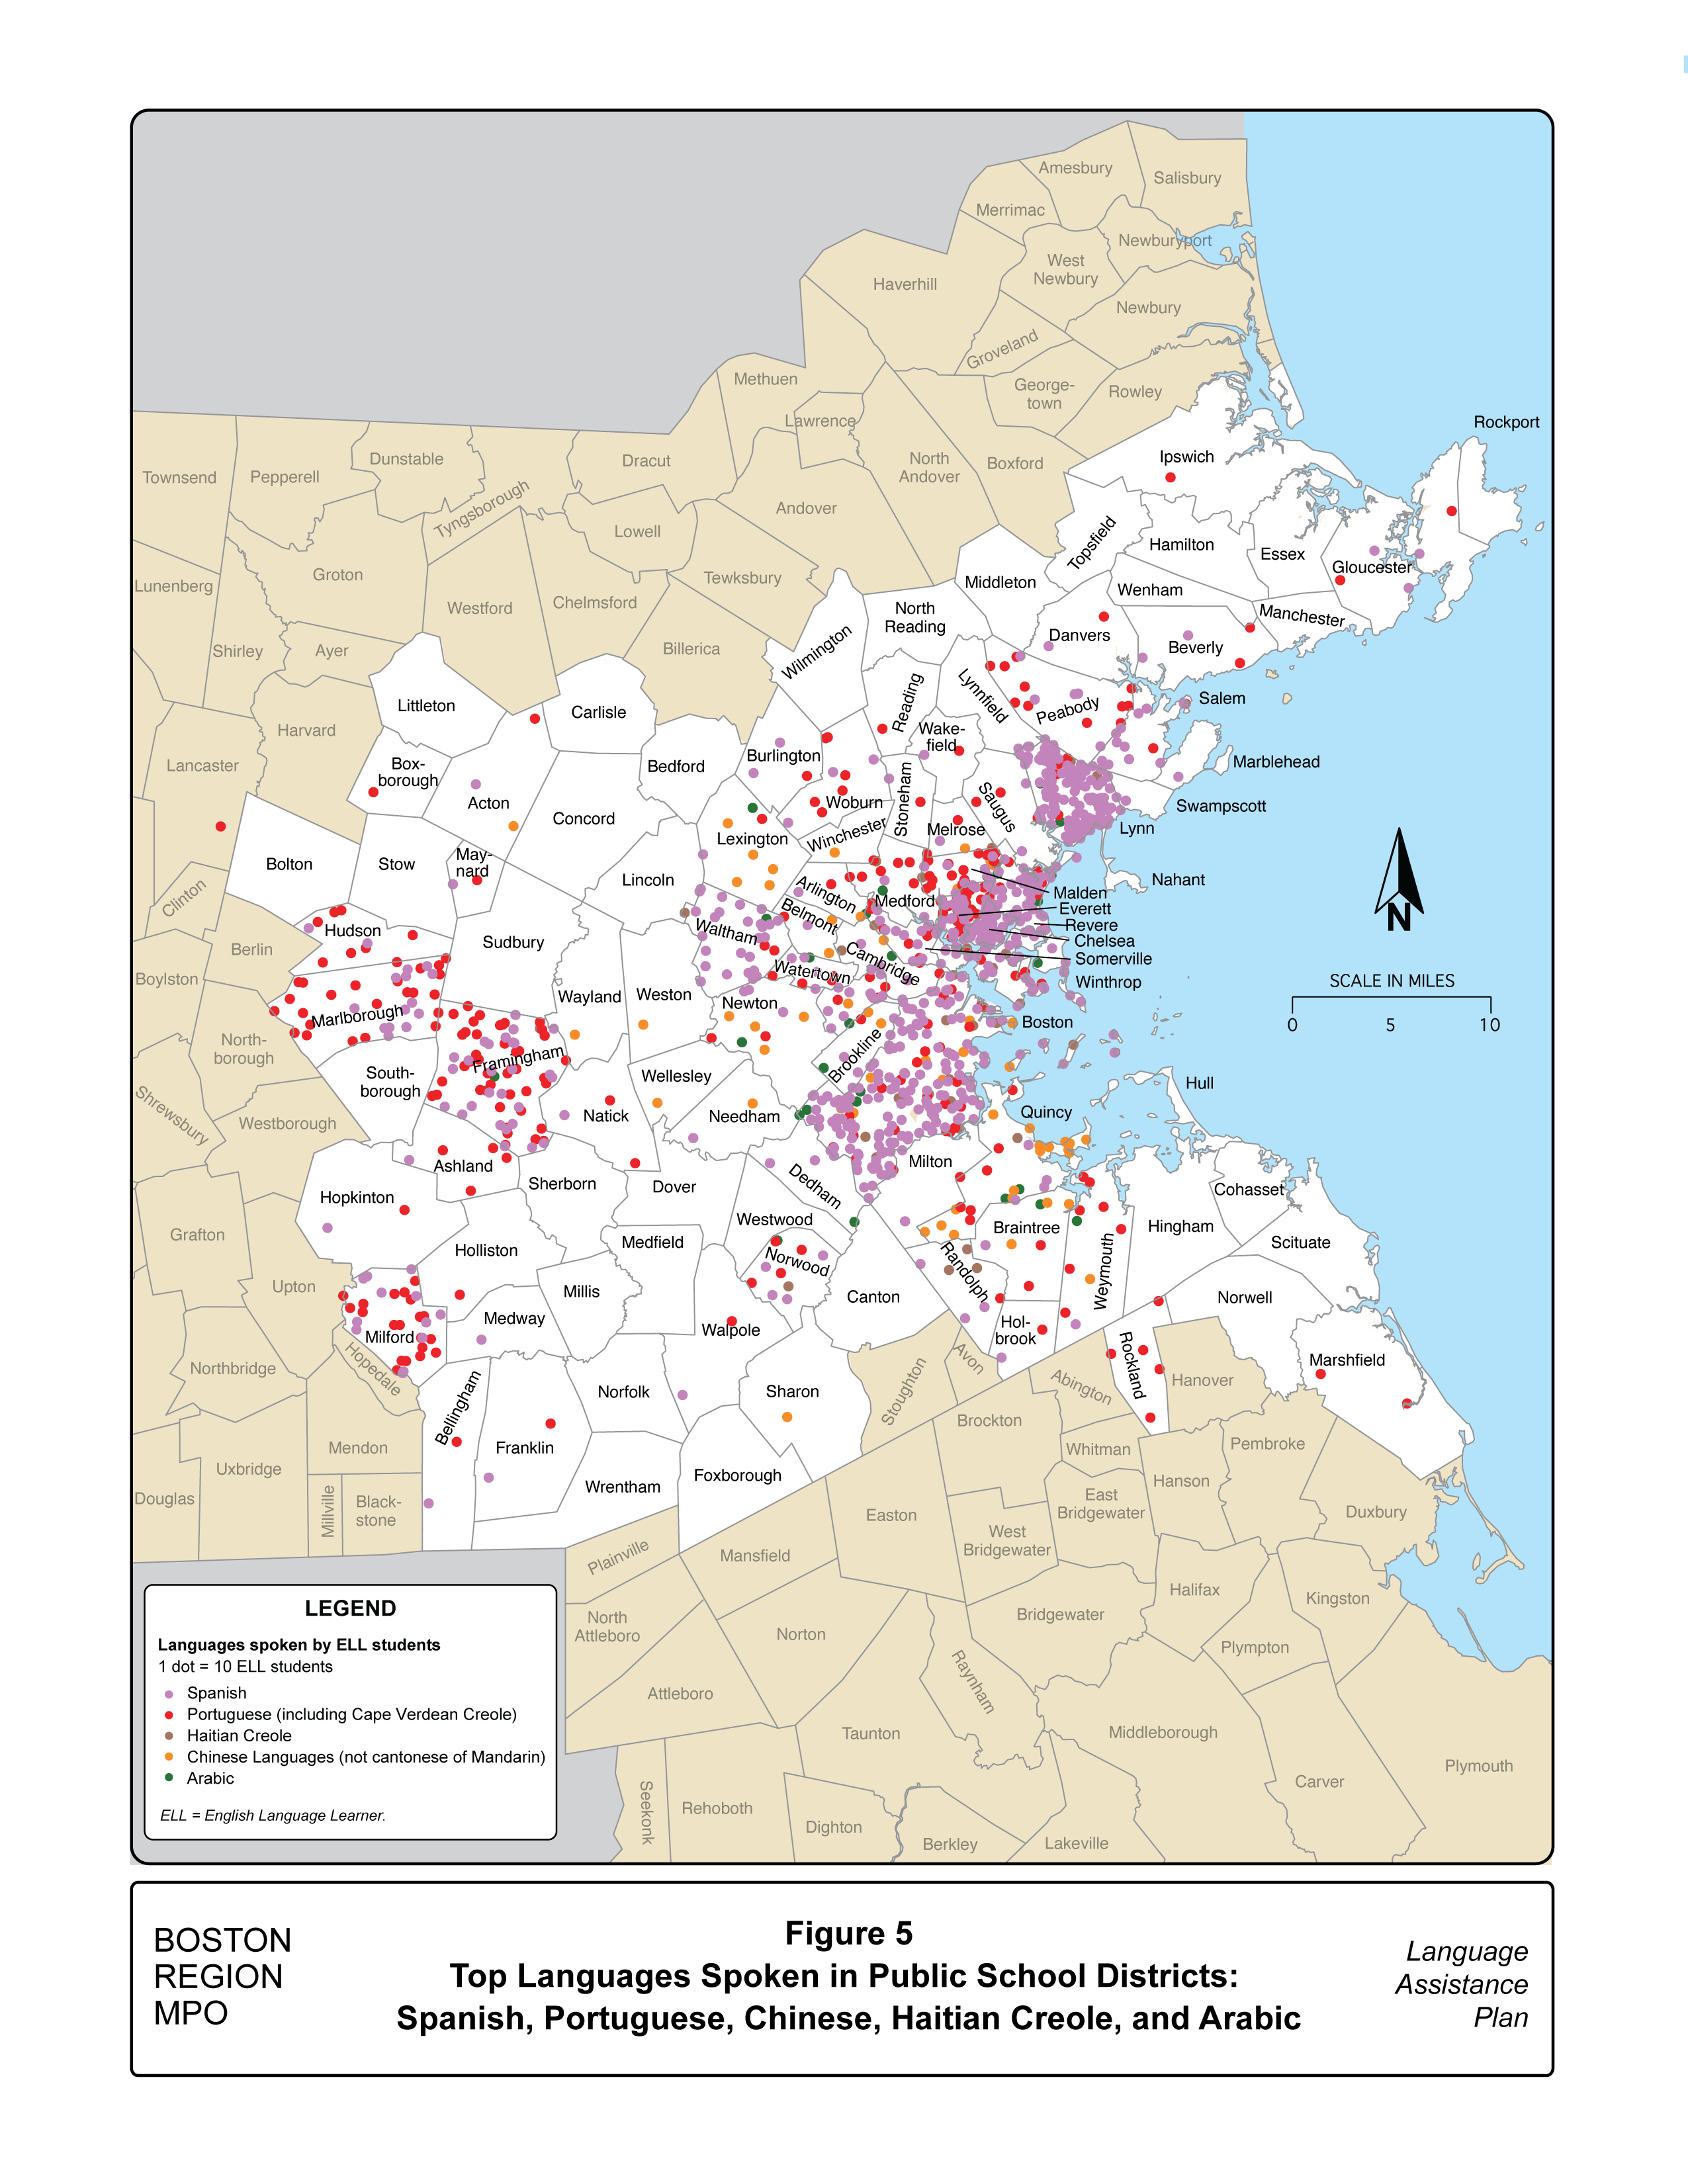 Figure 5 is a map showing the distribution of English language learners for the 2020–21 academic year who speak one of the top languages spoken in the Boston region’s public school districts: Spanish, Portuguese, Chinese, Haitian Creole, and Arabic.